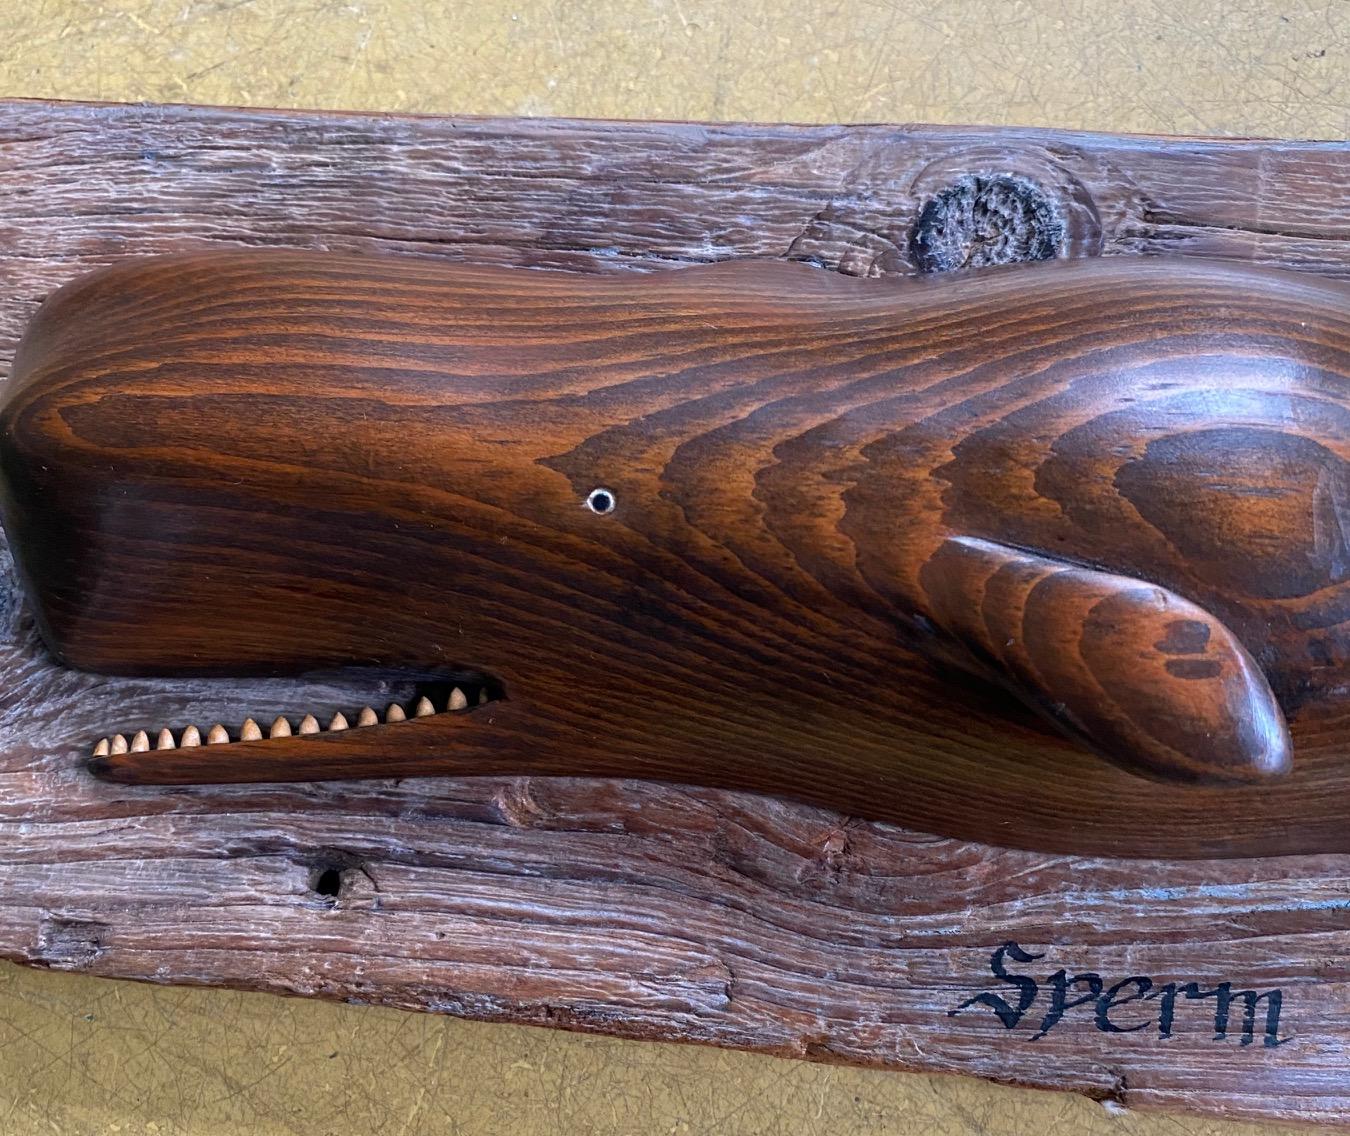 Vintage hand carved sperm whale by Nantucket artist William J. Dickson, 1971, a smoothly carved pine sperm whale with upraised flukes and open mouth exposing teeth, mounted on weathered barn board plank, signed and dated W.J. Dickson, 1971 on the